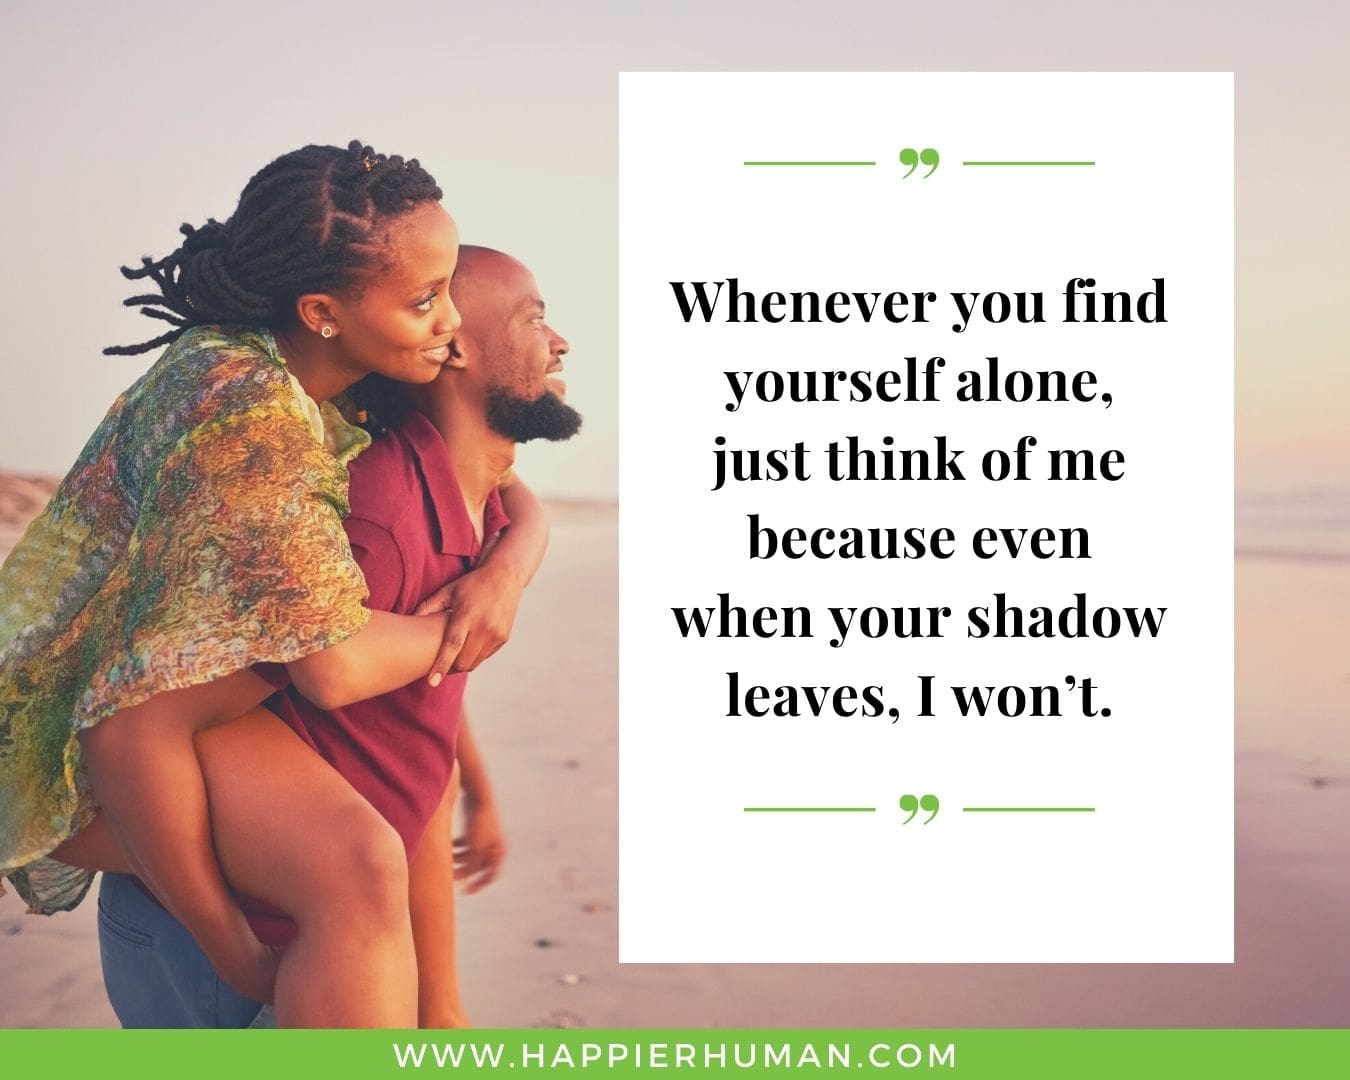 I’m Here for You Quotes - “Whenever you find yourself alone, just think of me because even when your shadow leaves, I won’t.”